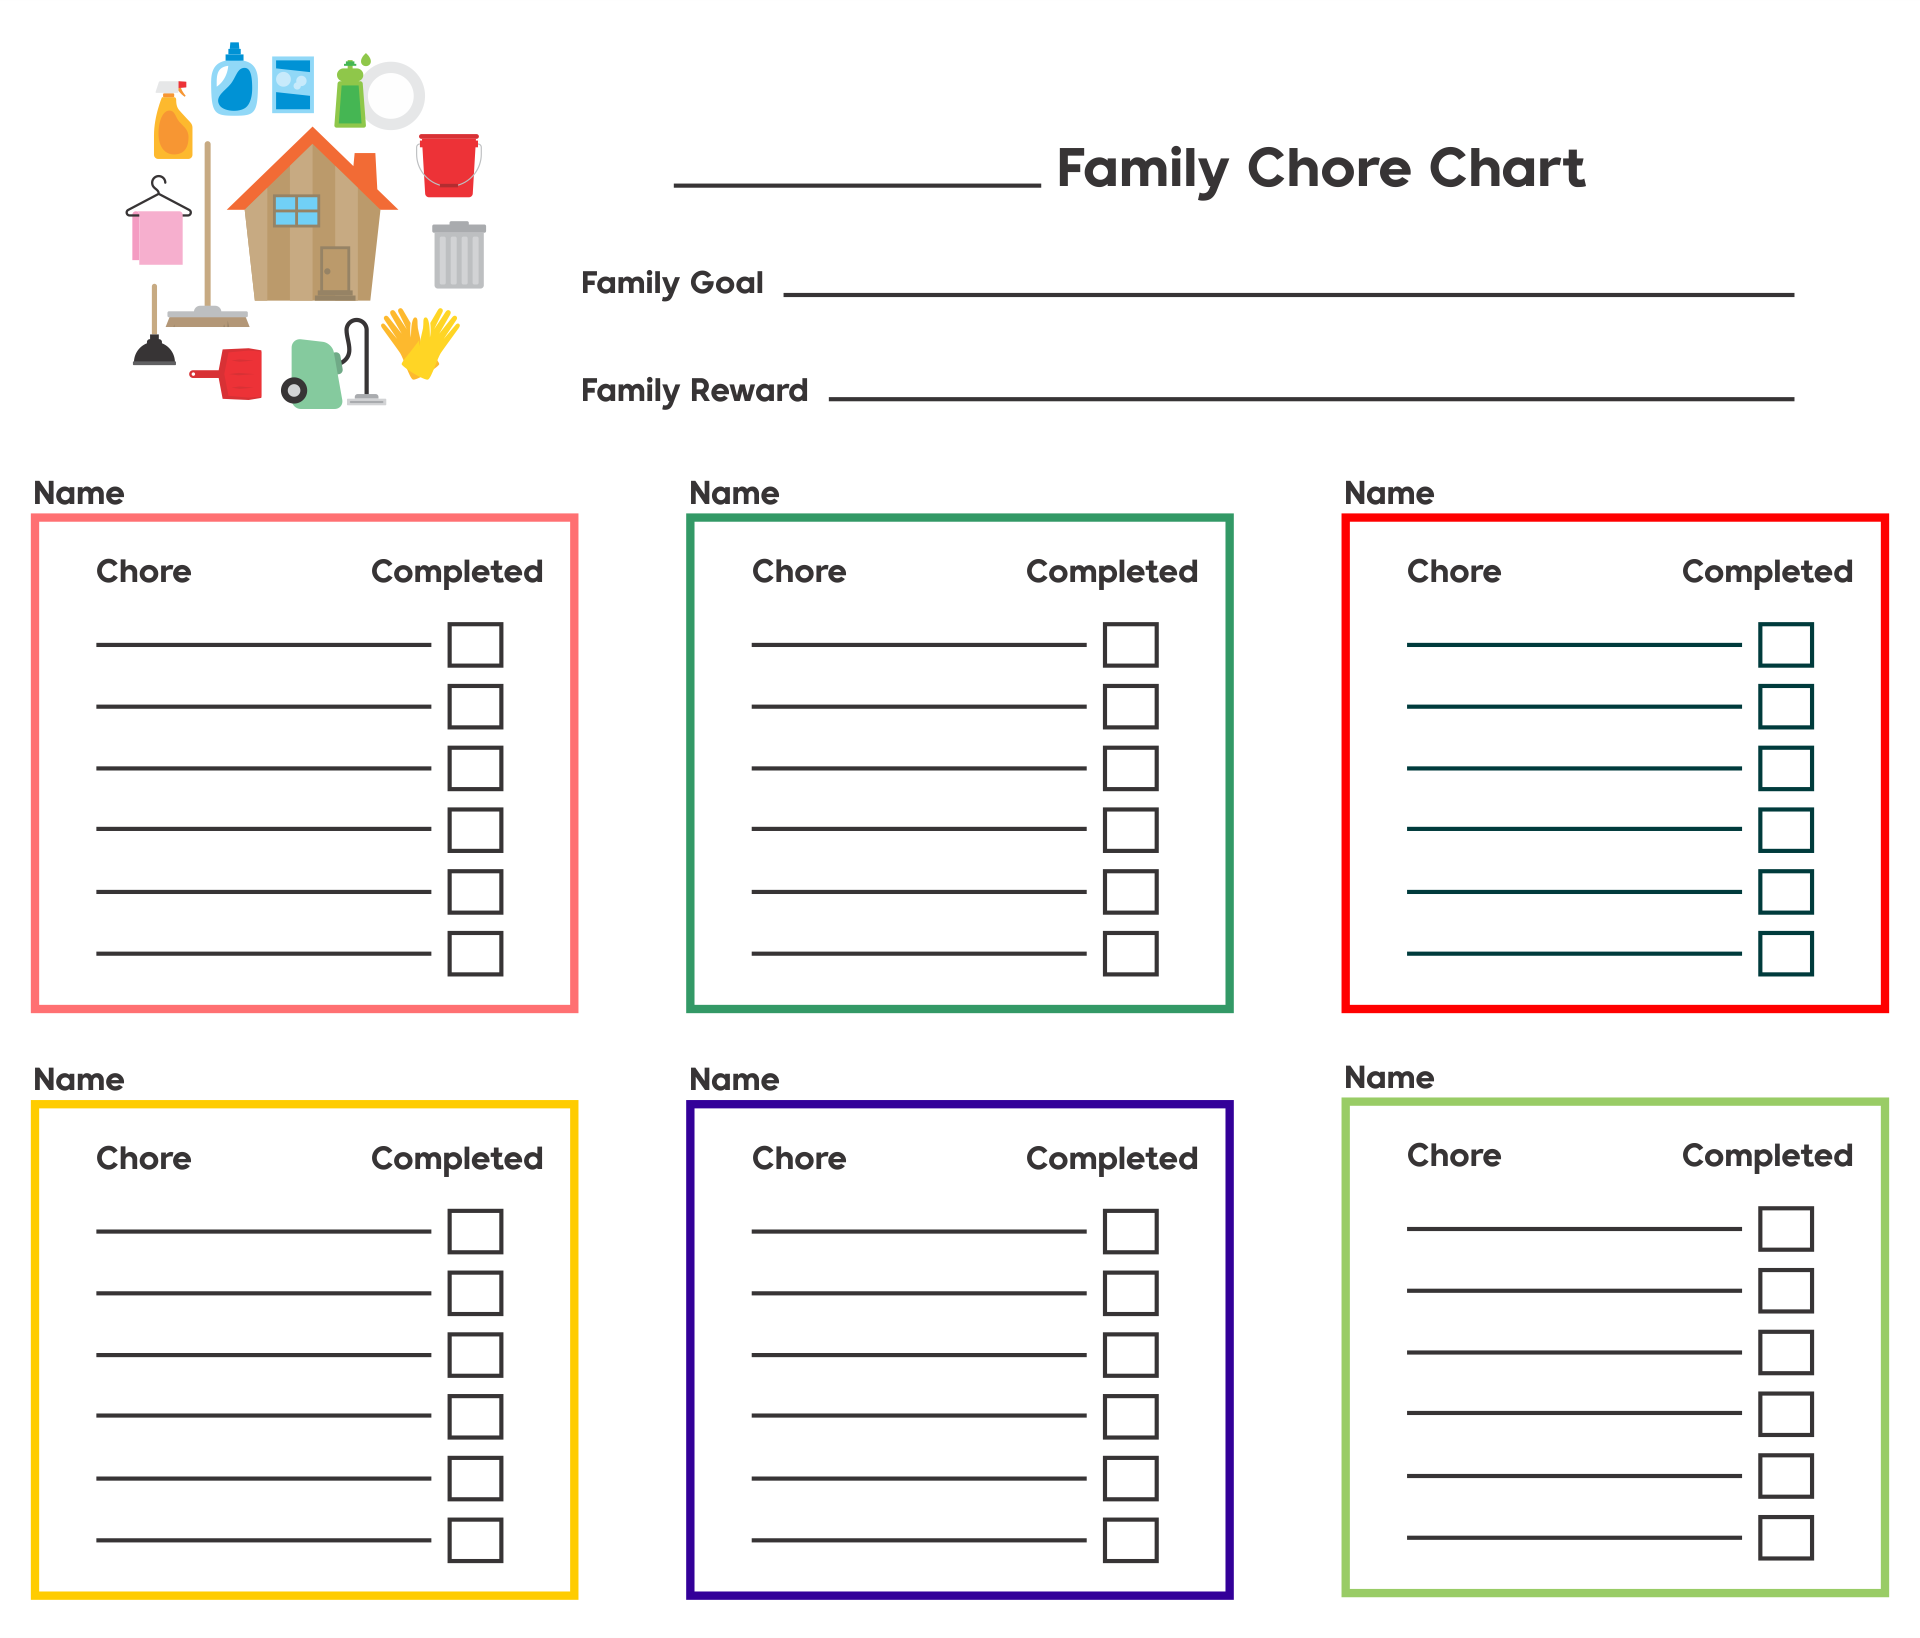 5-best-large-family-chore-chart-printable-pdf-for-free-at-printablee